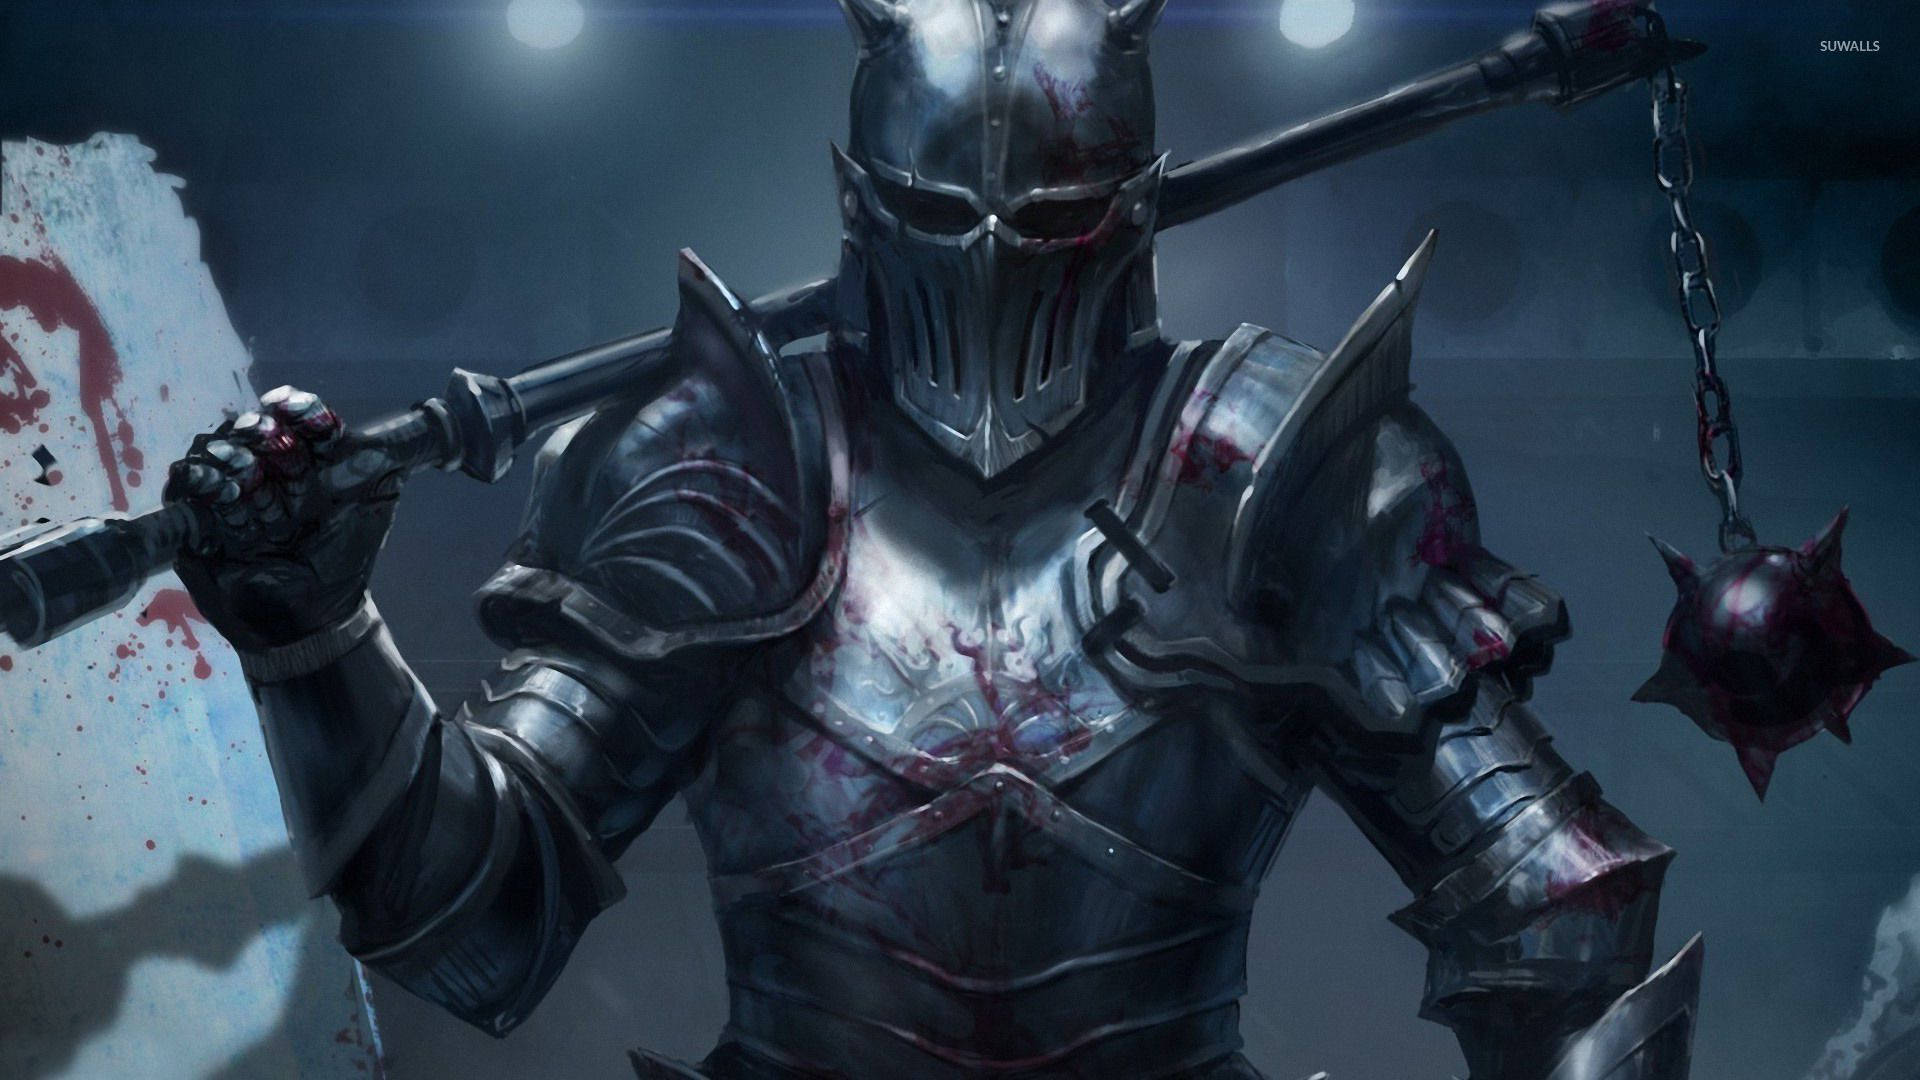 Armored Knight Holding Mace Background